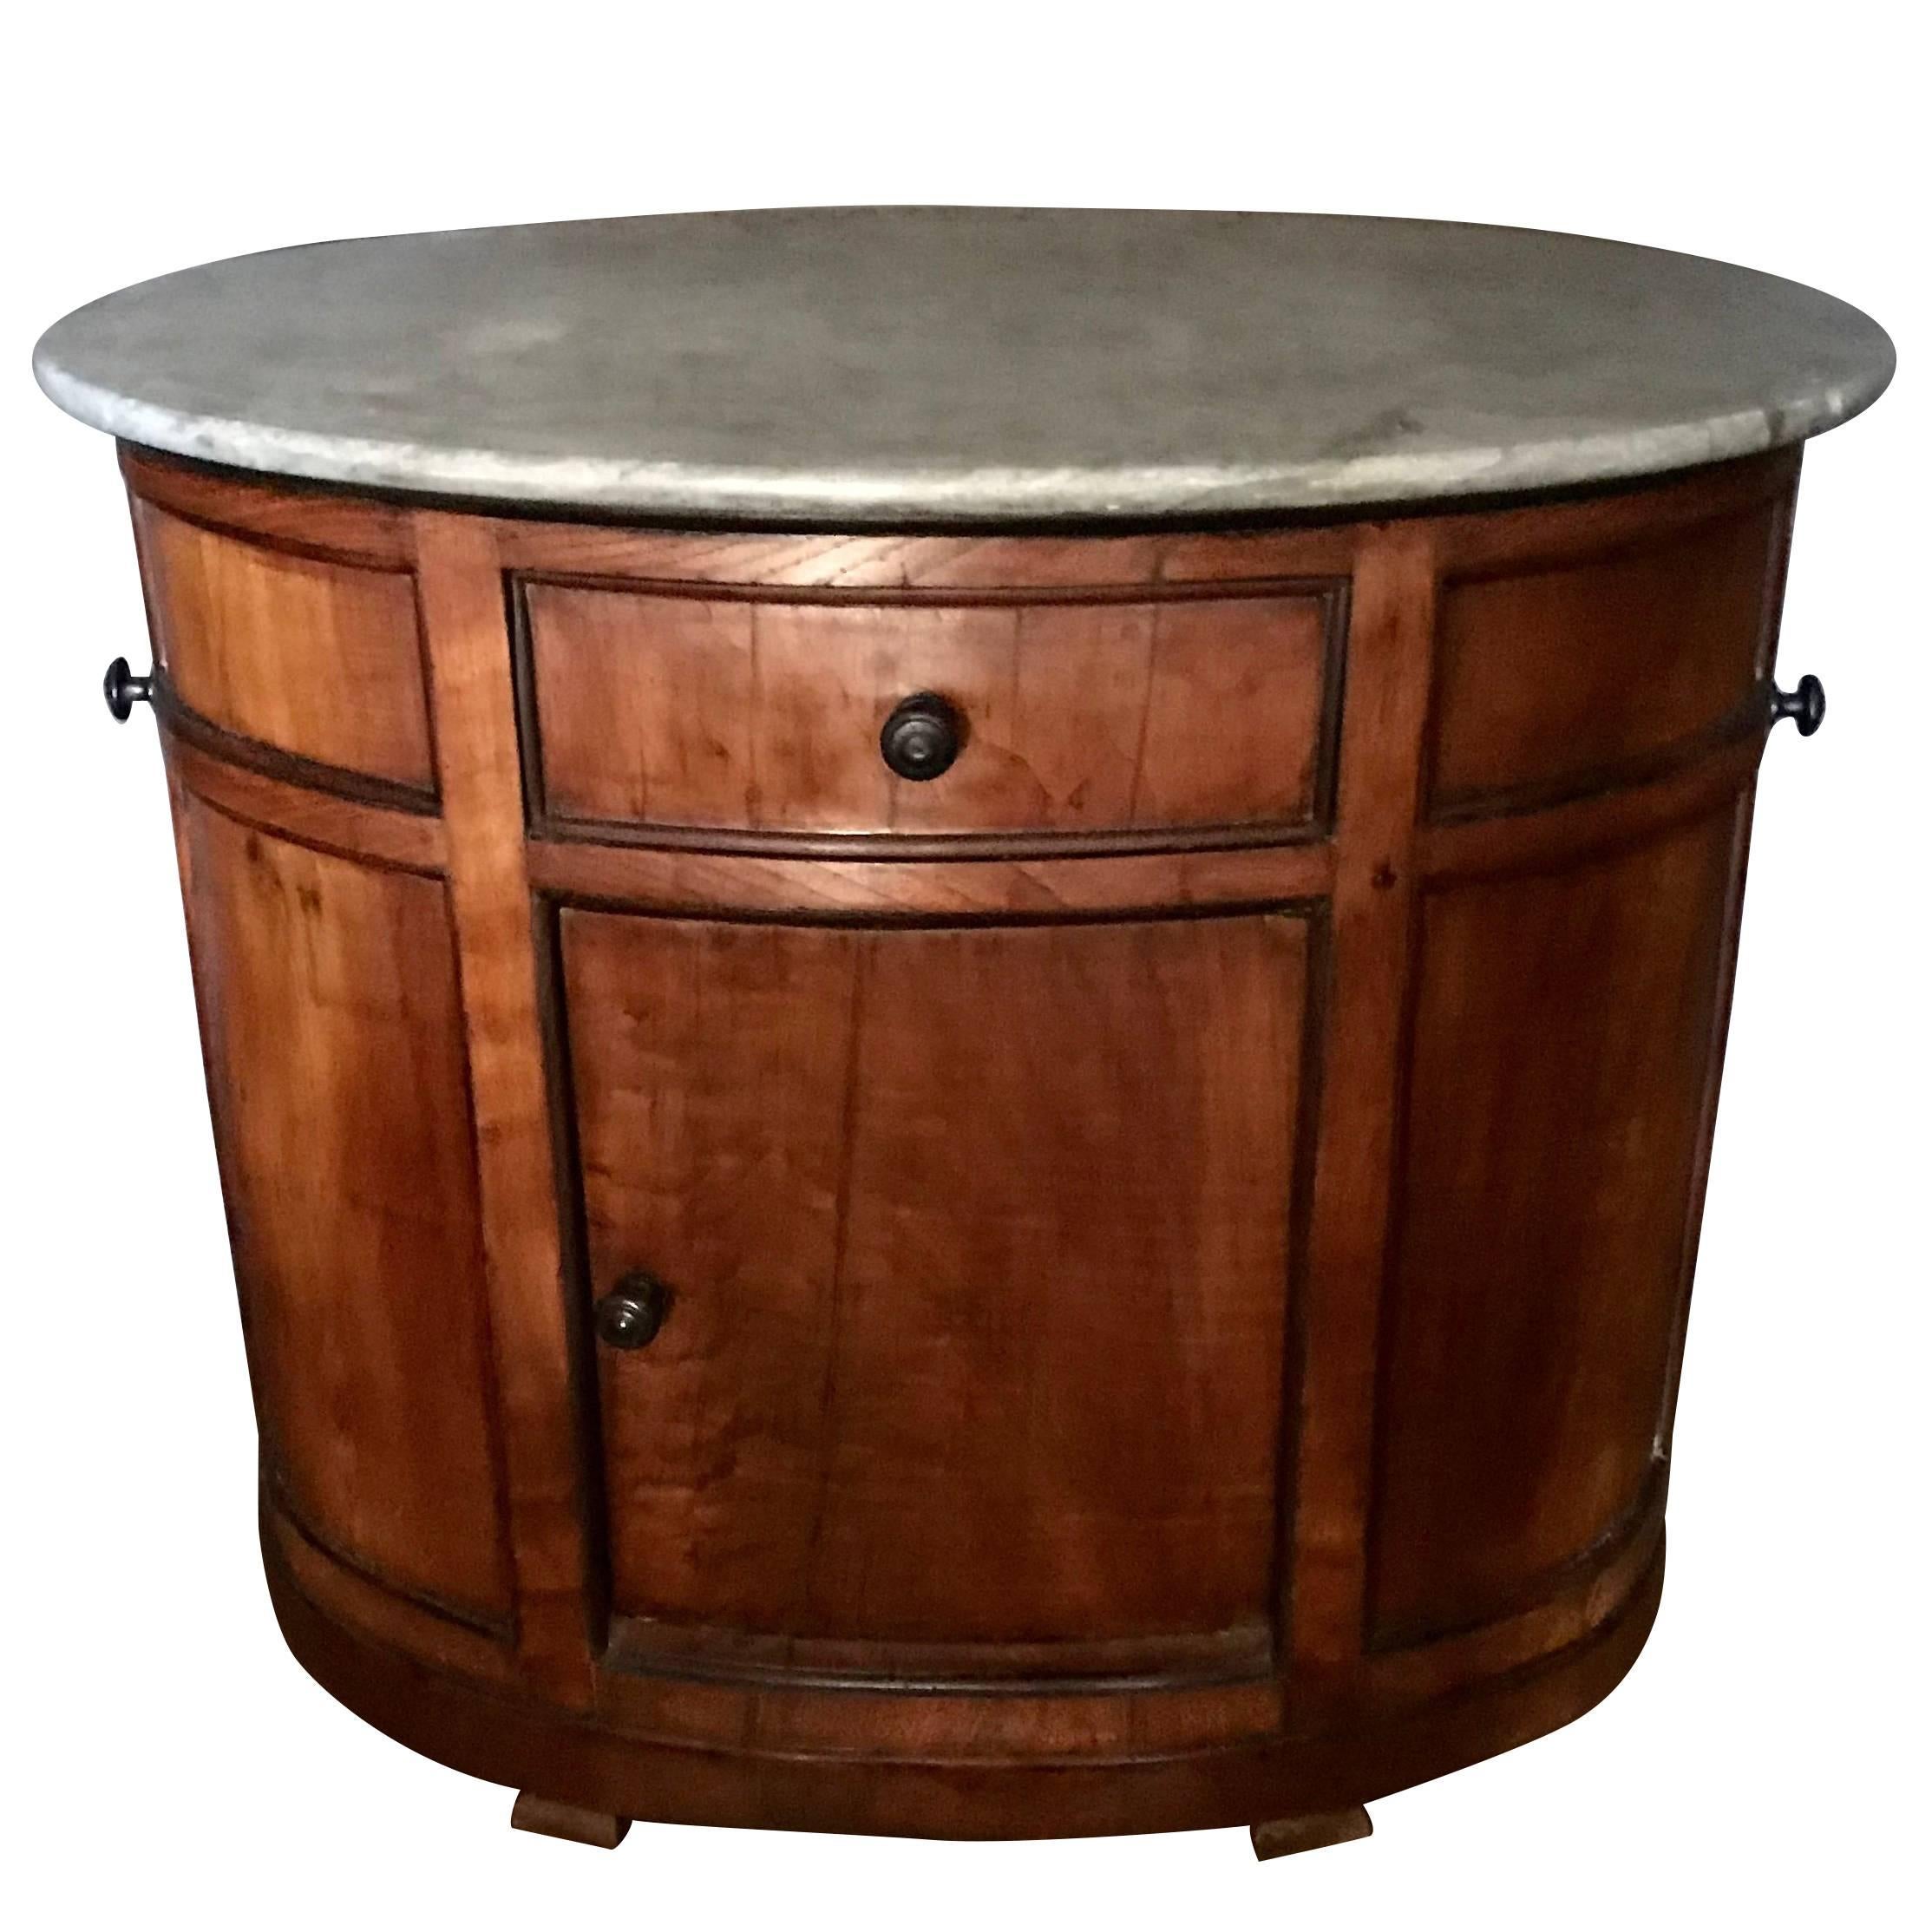 Italian Chestnut Oval Cabinet with Grey Marble Top